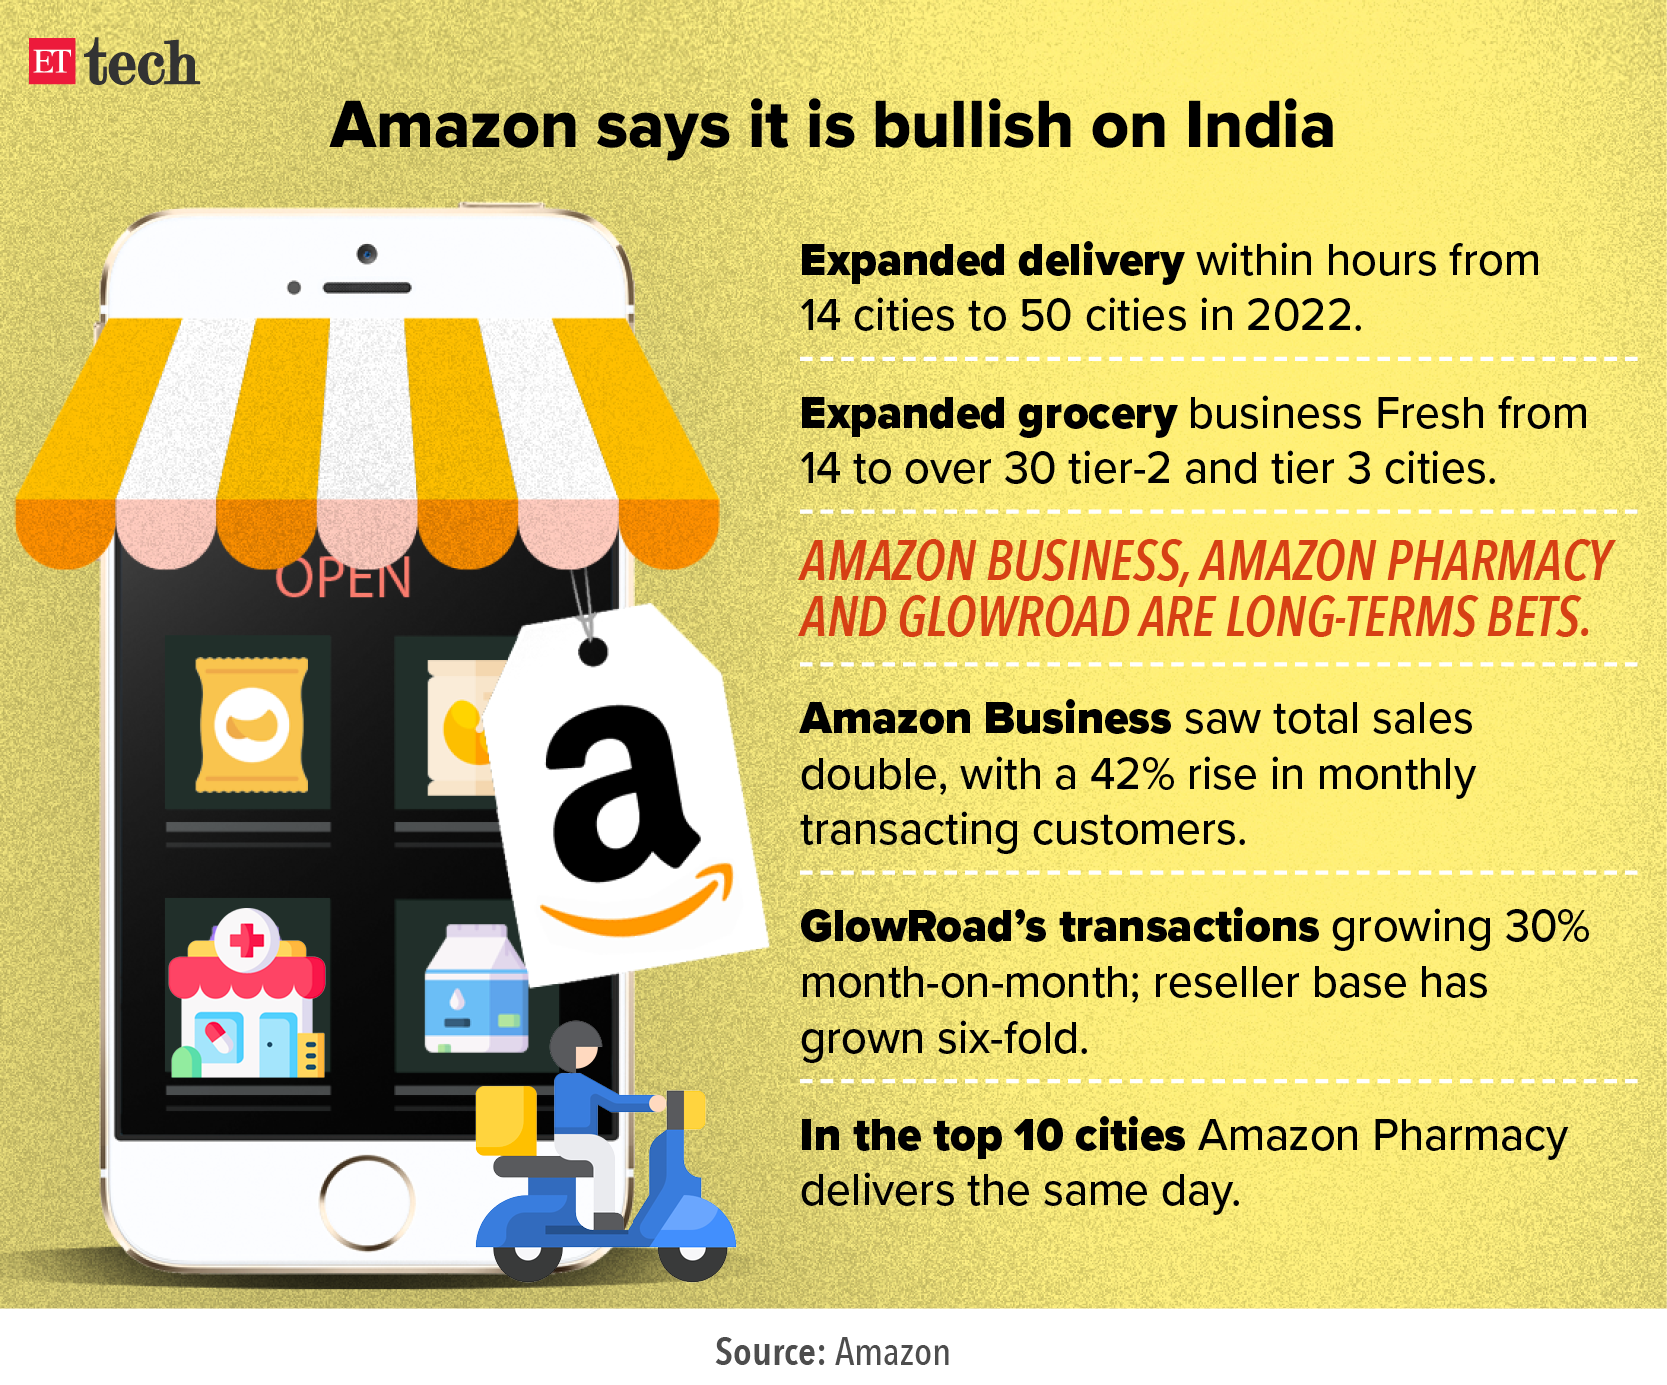 Amazon relooking experiments, not shutting businesses: Tiwary